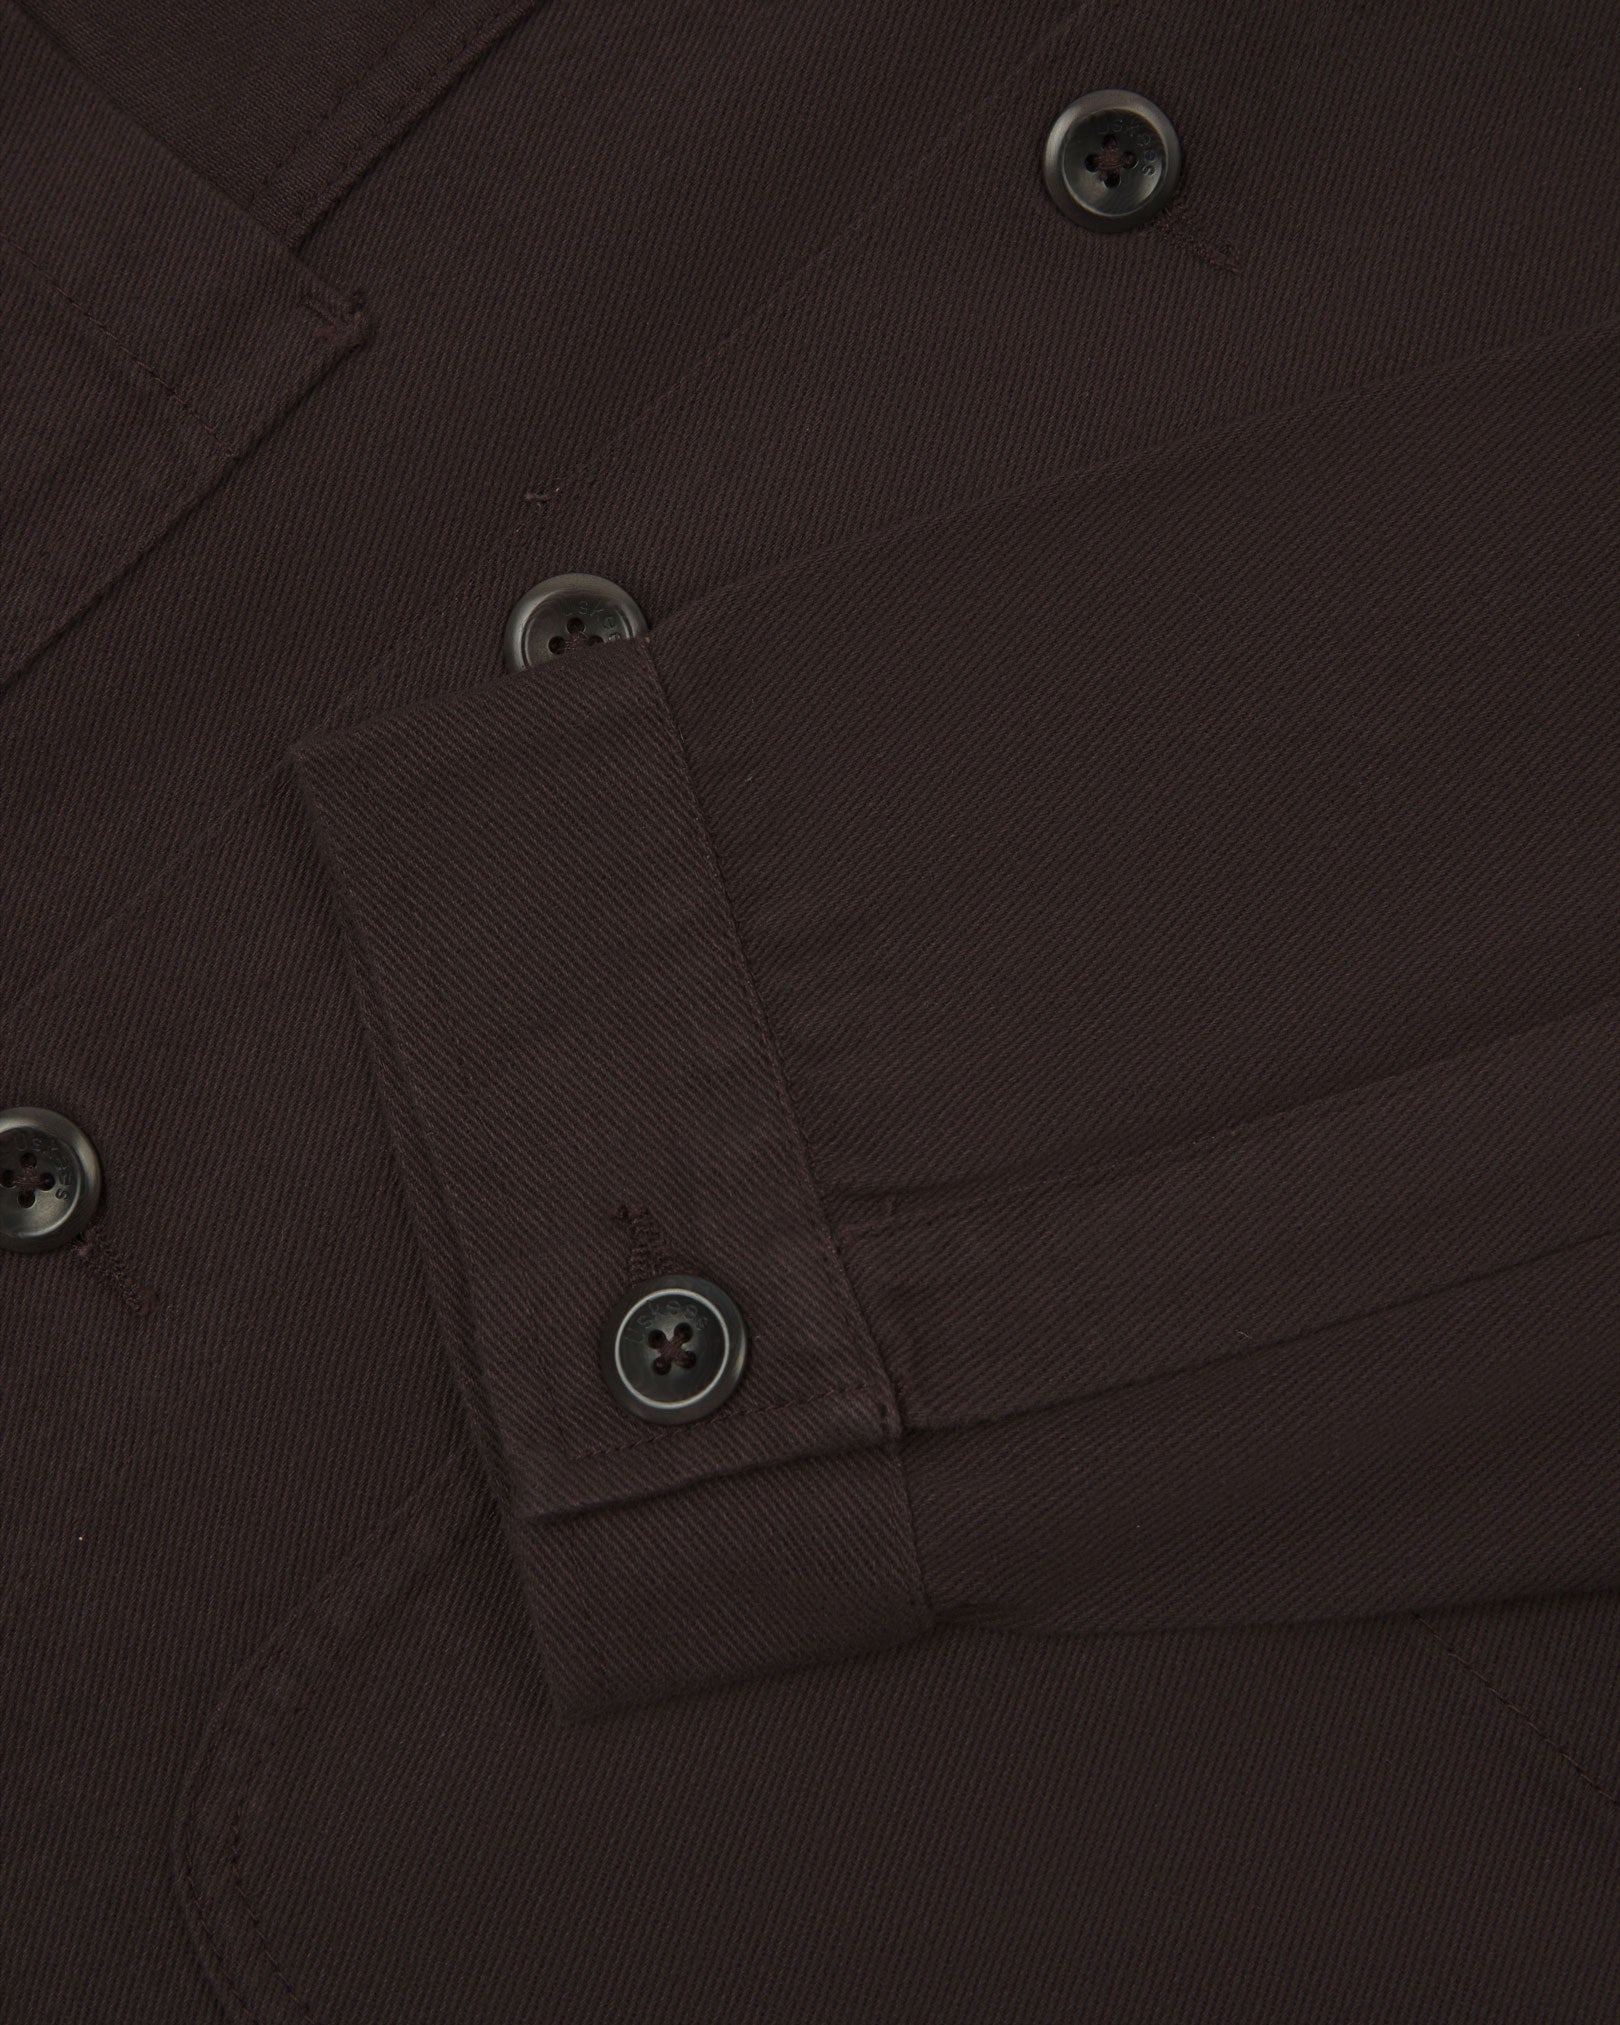 Closer detail view of multiple layered patch pockets, cuff detailing, corozo buttons and extra durable weave of the organic cotton drill fabric.